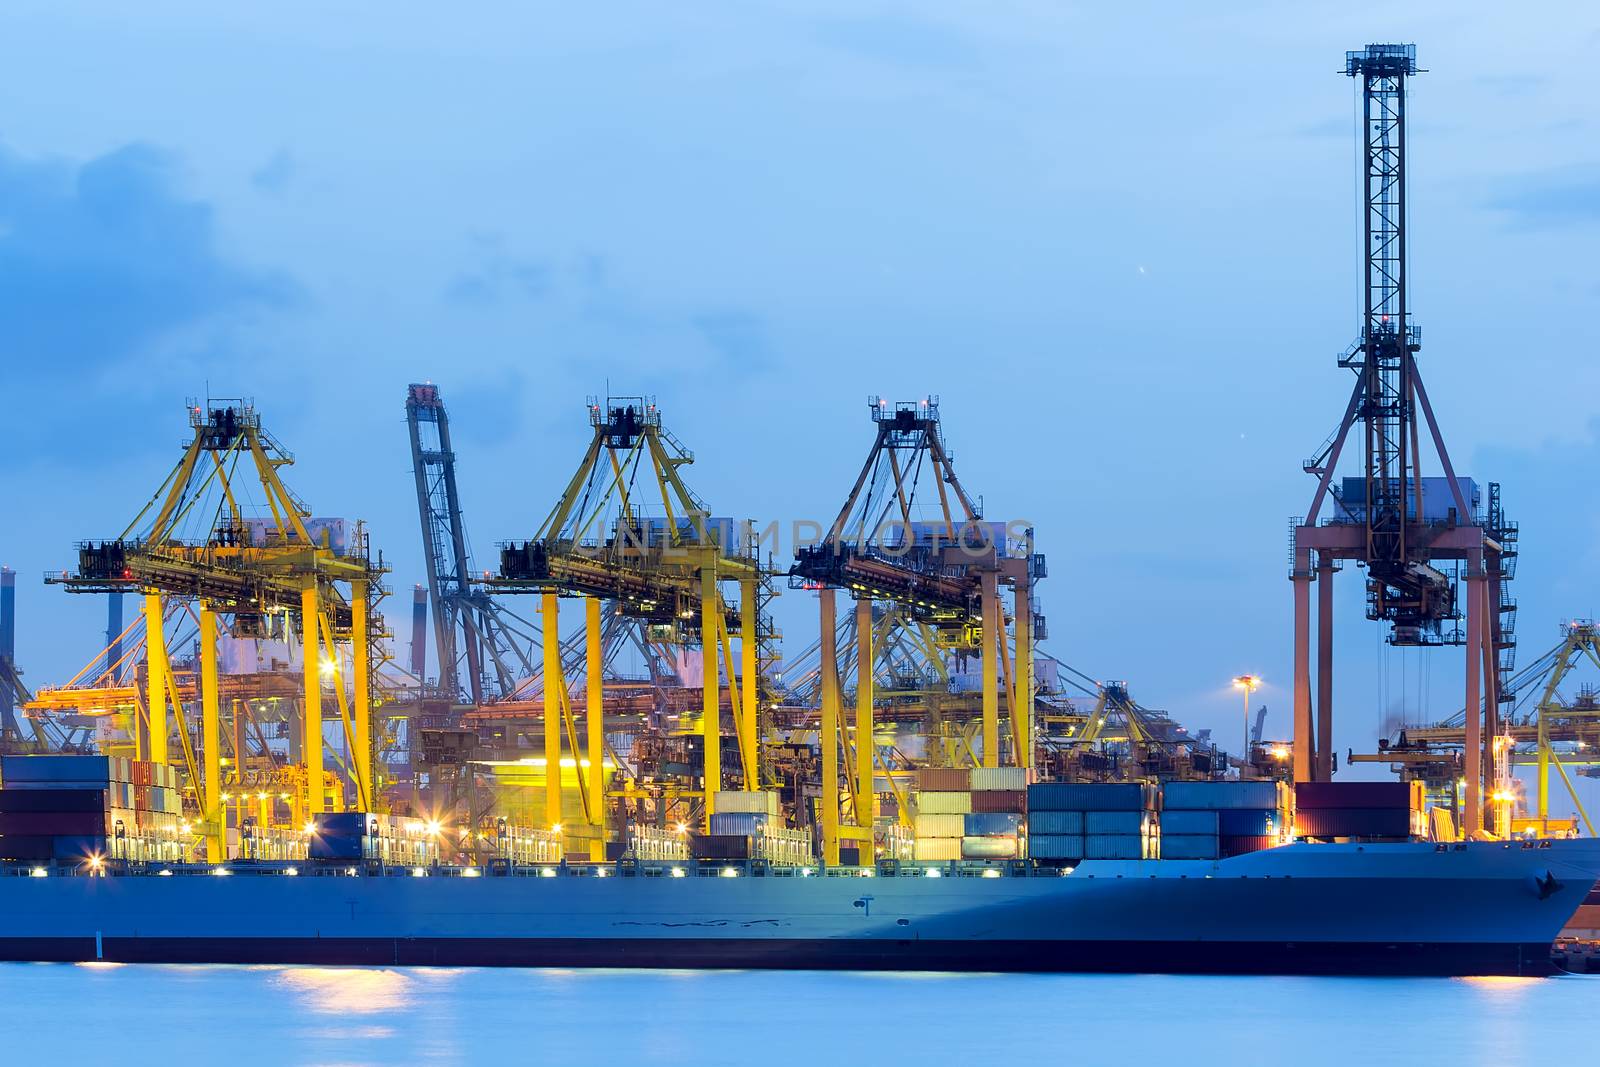 Loading and unloading containers at Port of Singapore during evening